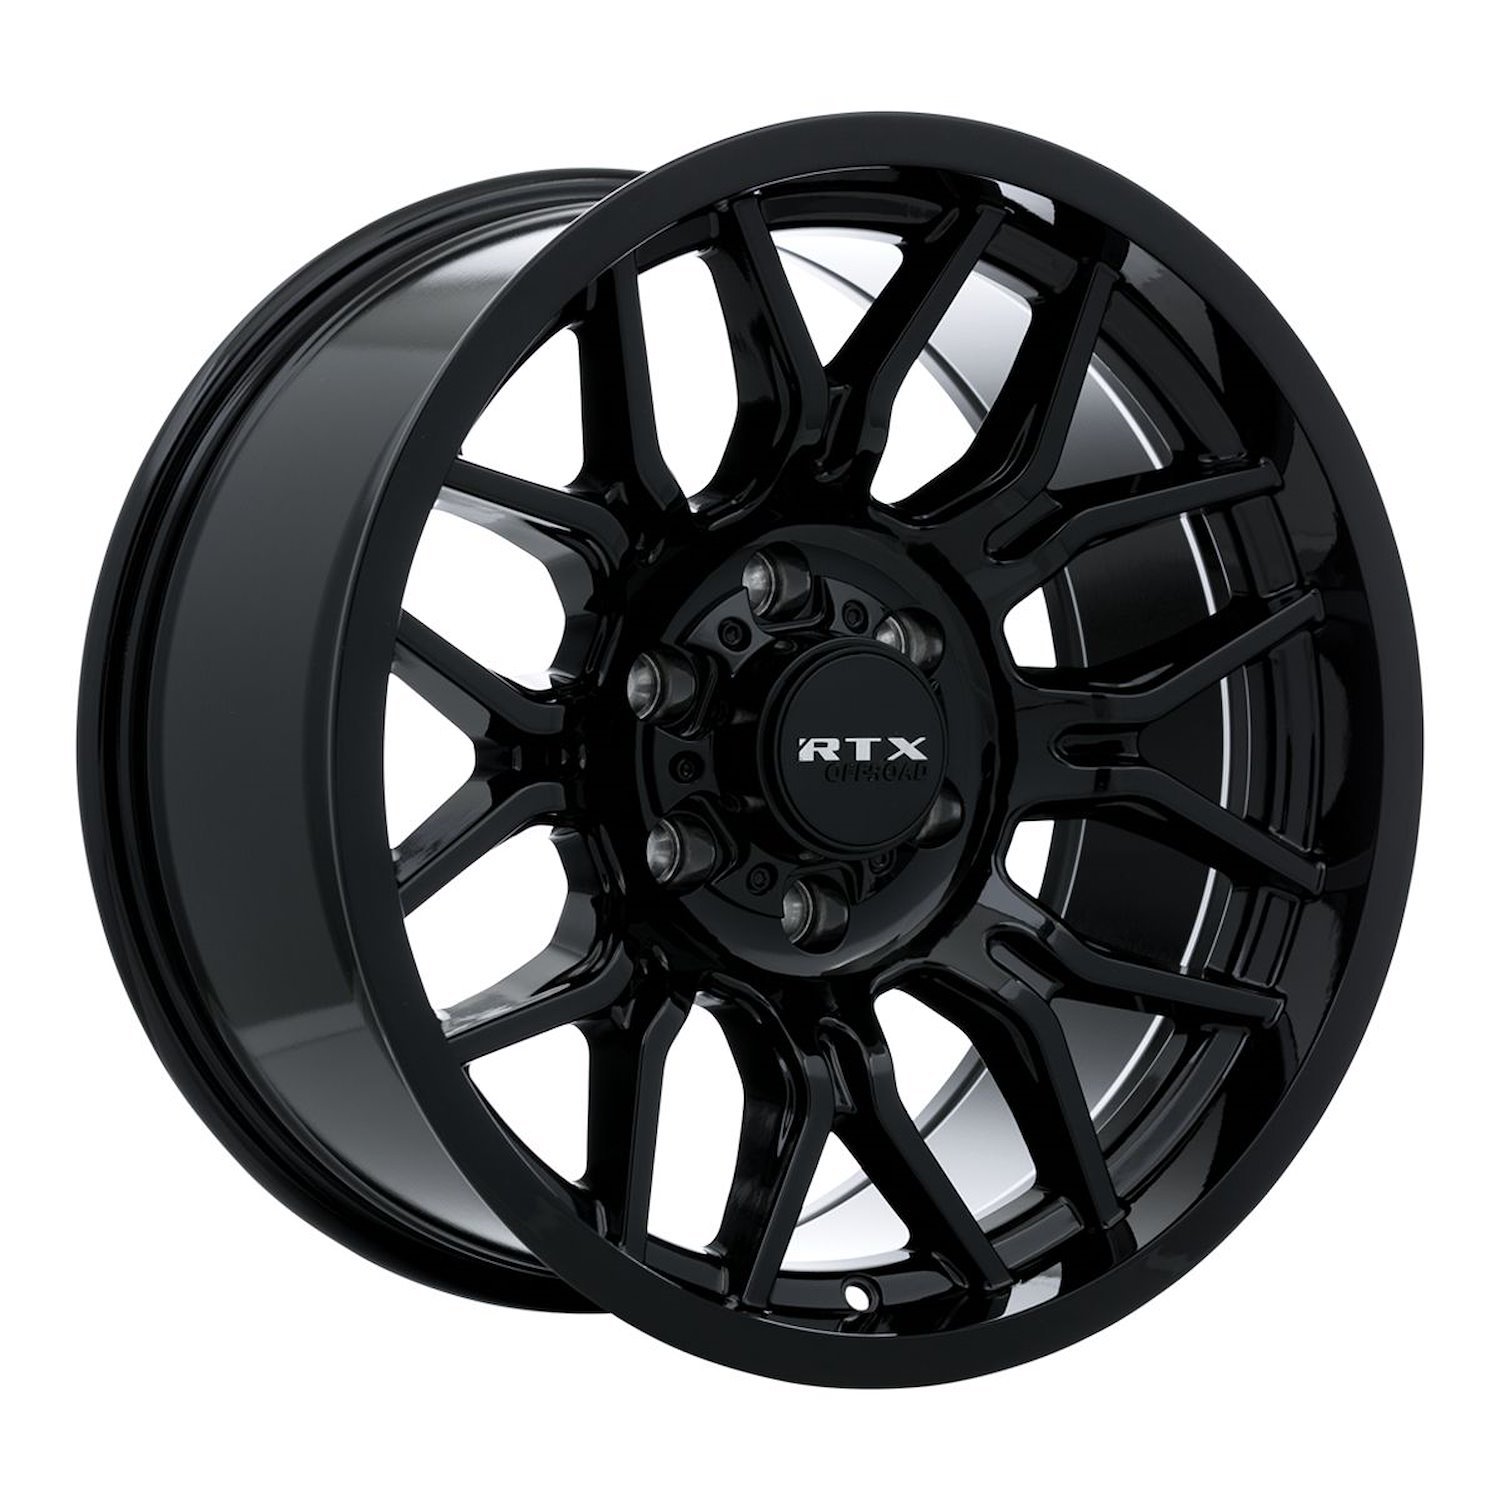 163764 Off-Road Series Claw Wheel [Size: 20" x 10"] Gloss Black Finish